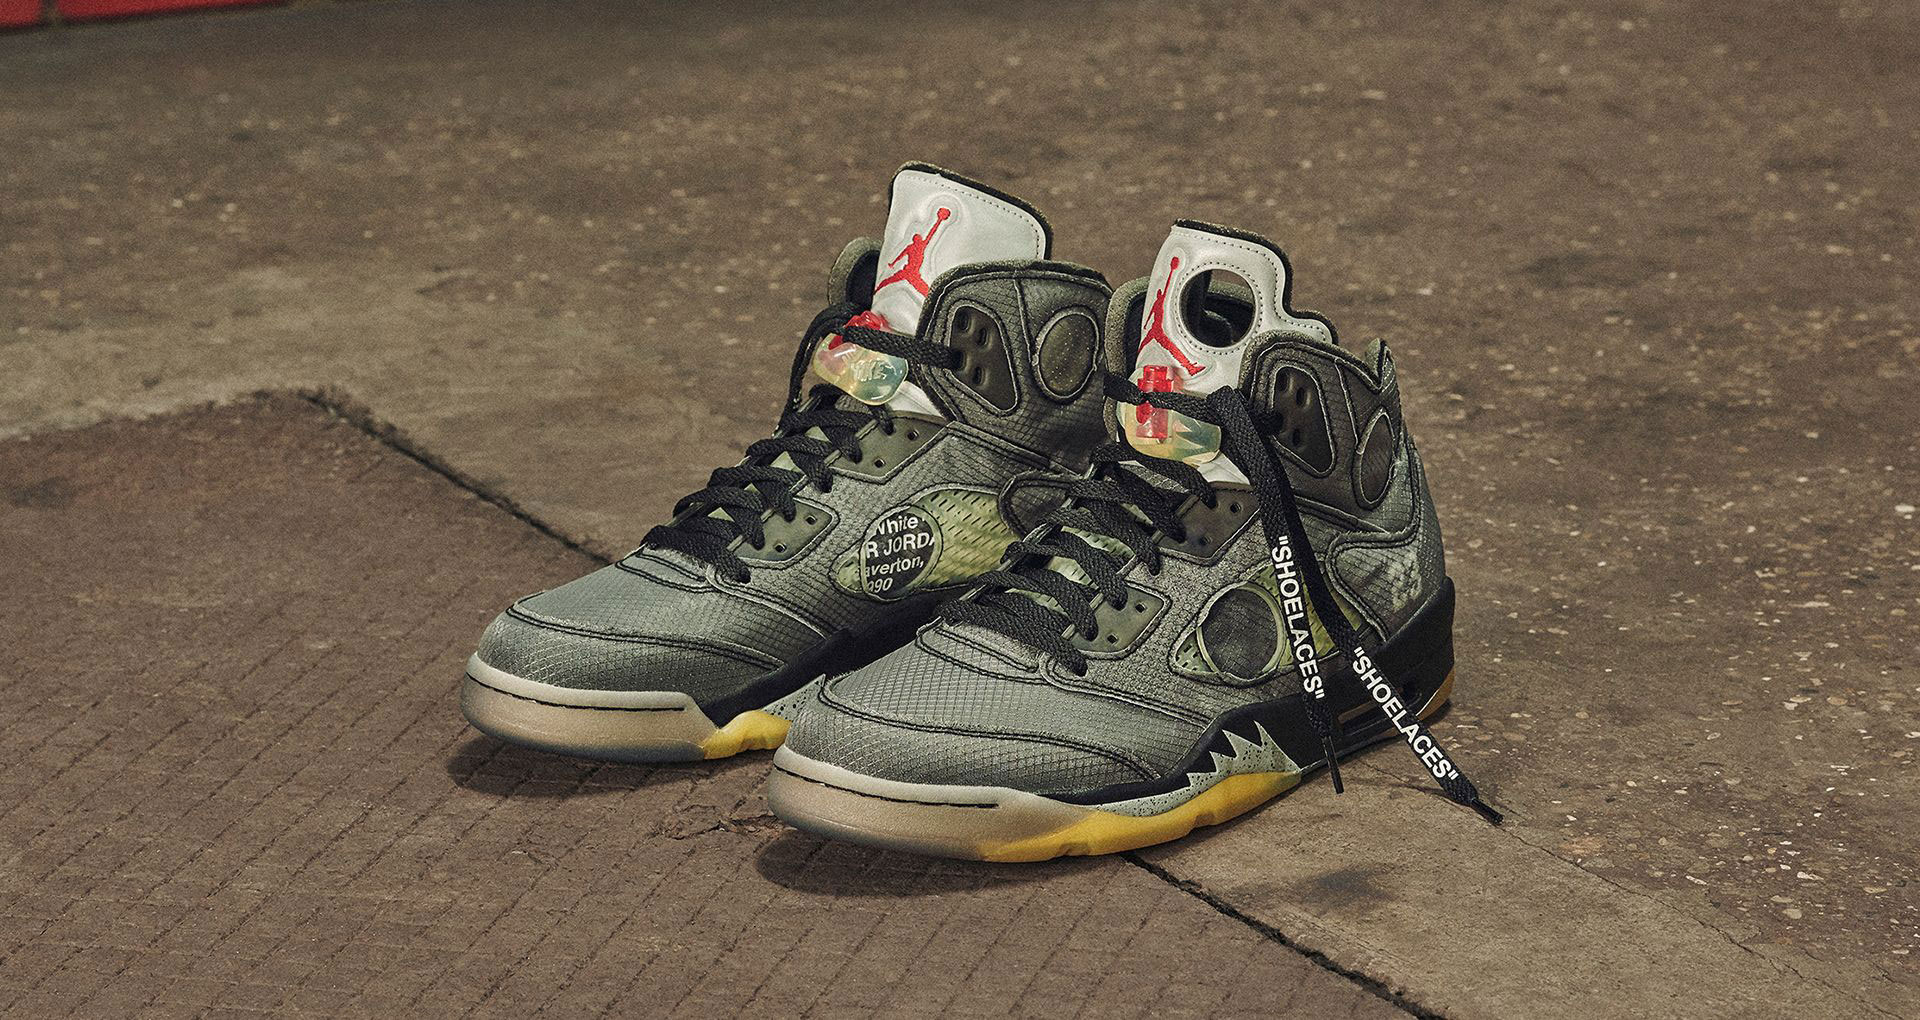 Off White Air Jordan 5 Clothing and 